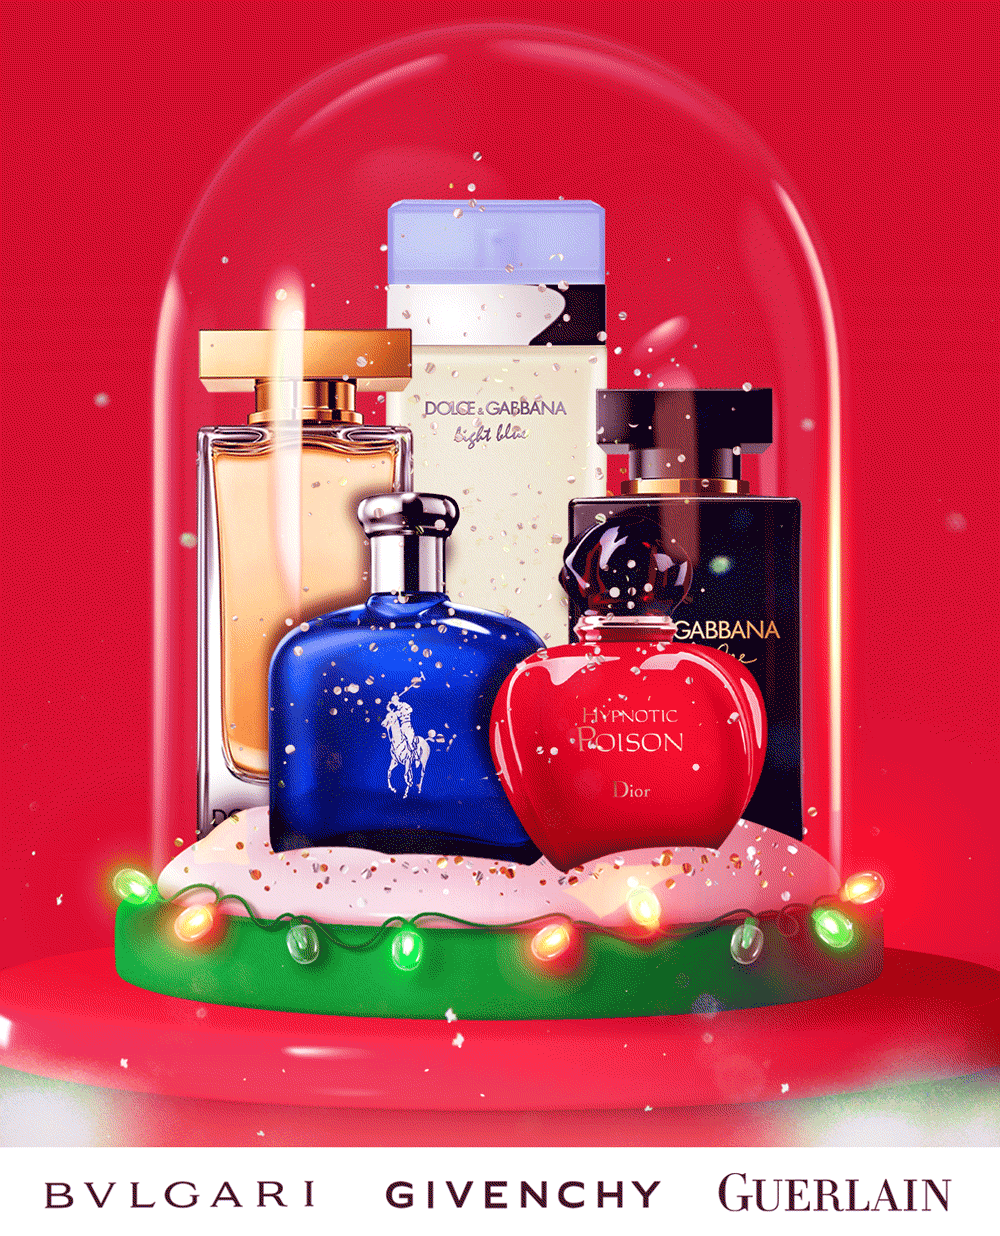 Popular fragrances displayed on a red and green background advertising early holiday deals